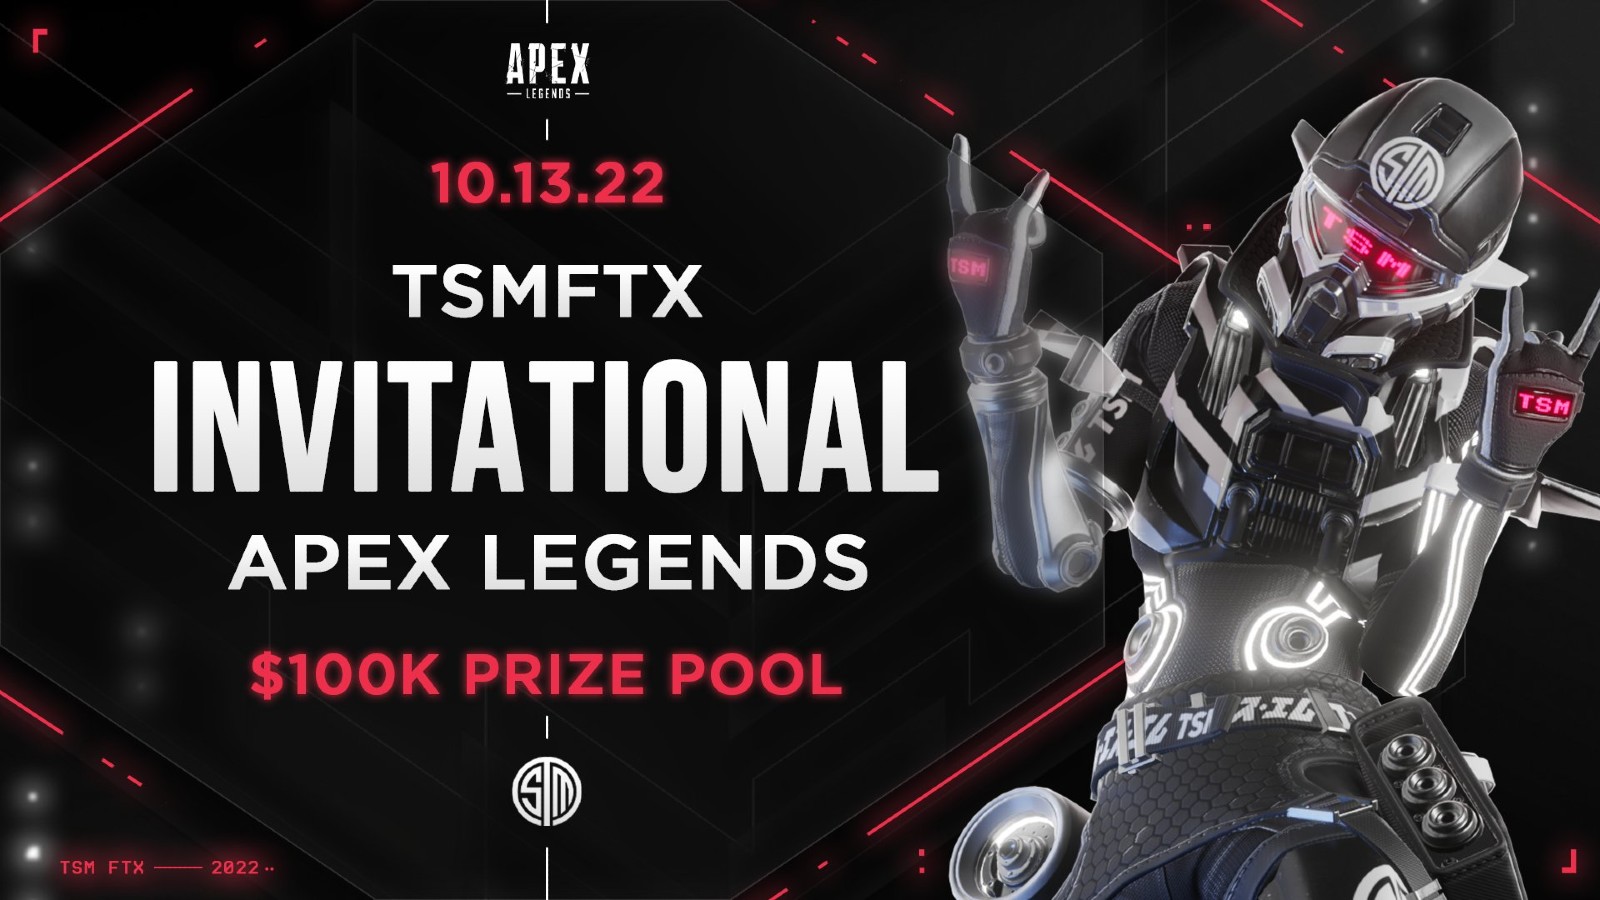 How to watch TSMs $100k Apex Legends Invitational Streams, schedule, teams